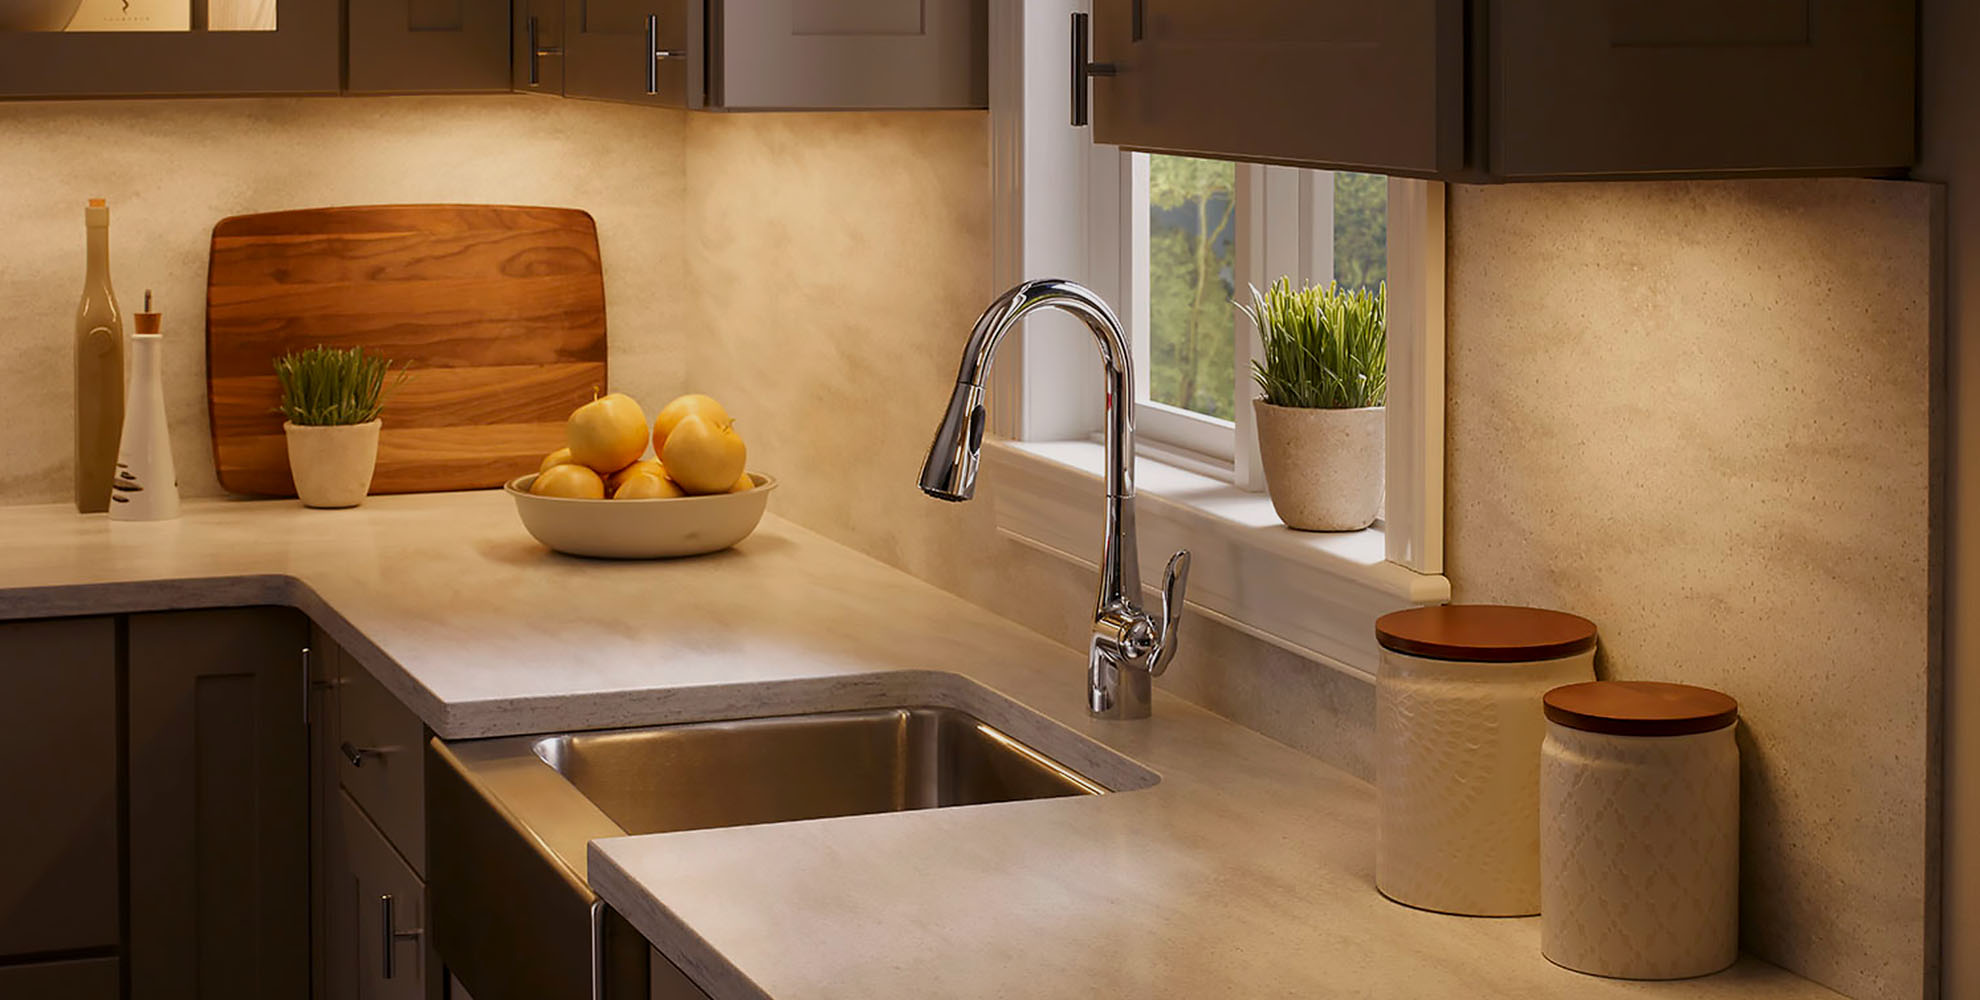 How To Choose Under Cabinet Lighting, What Is The Best Under Cabinet Counter Lighting